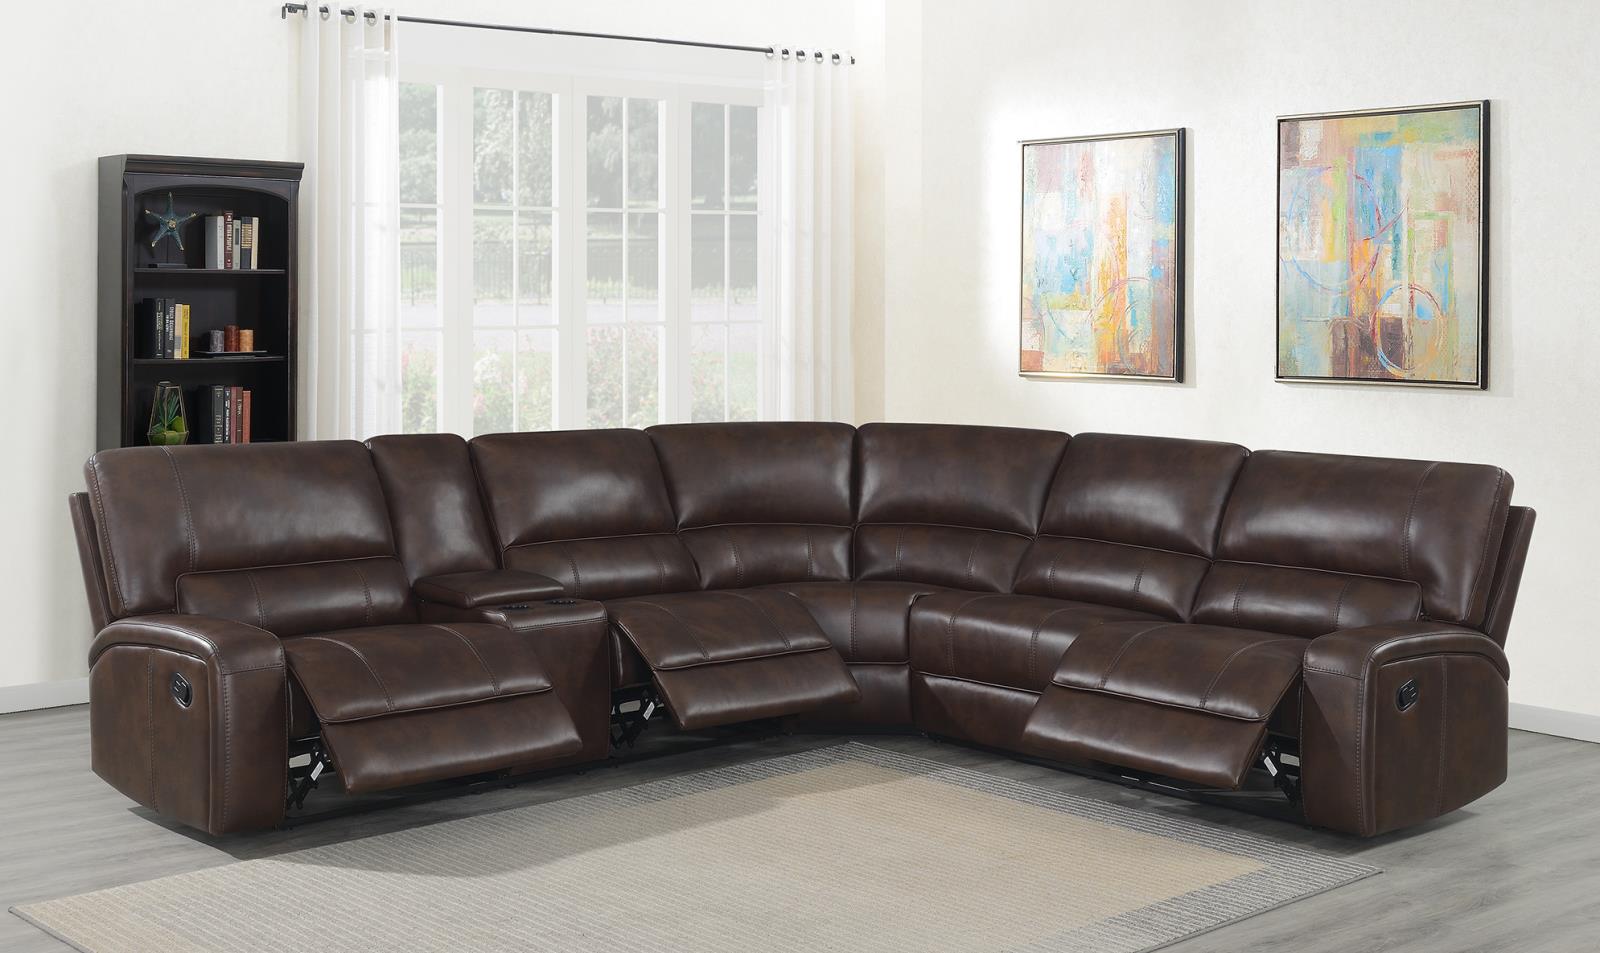 Brunson 3-piece Upholstered Motion Sectional Brown - What A Room